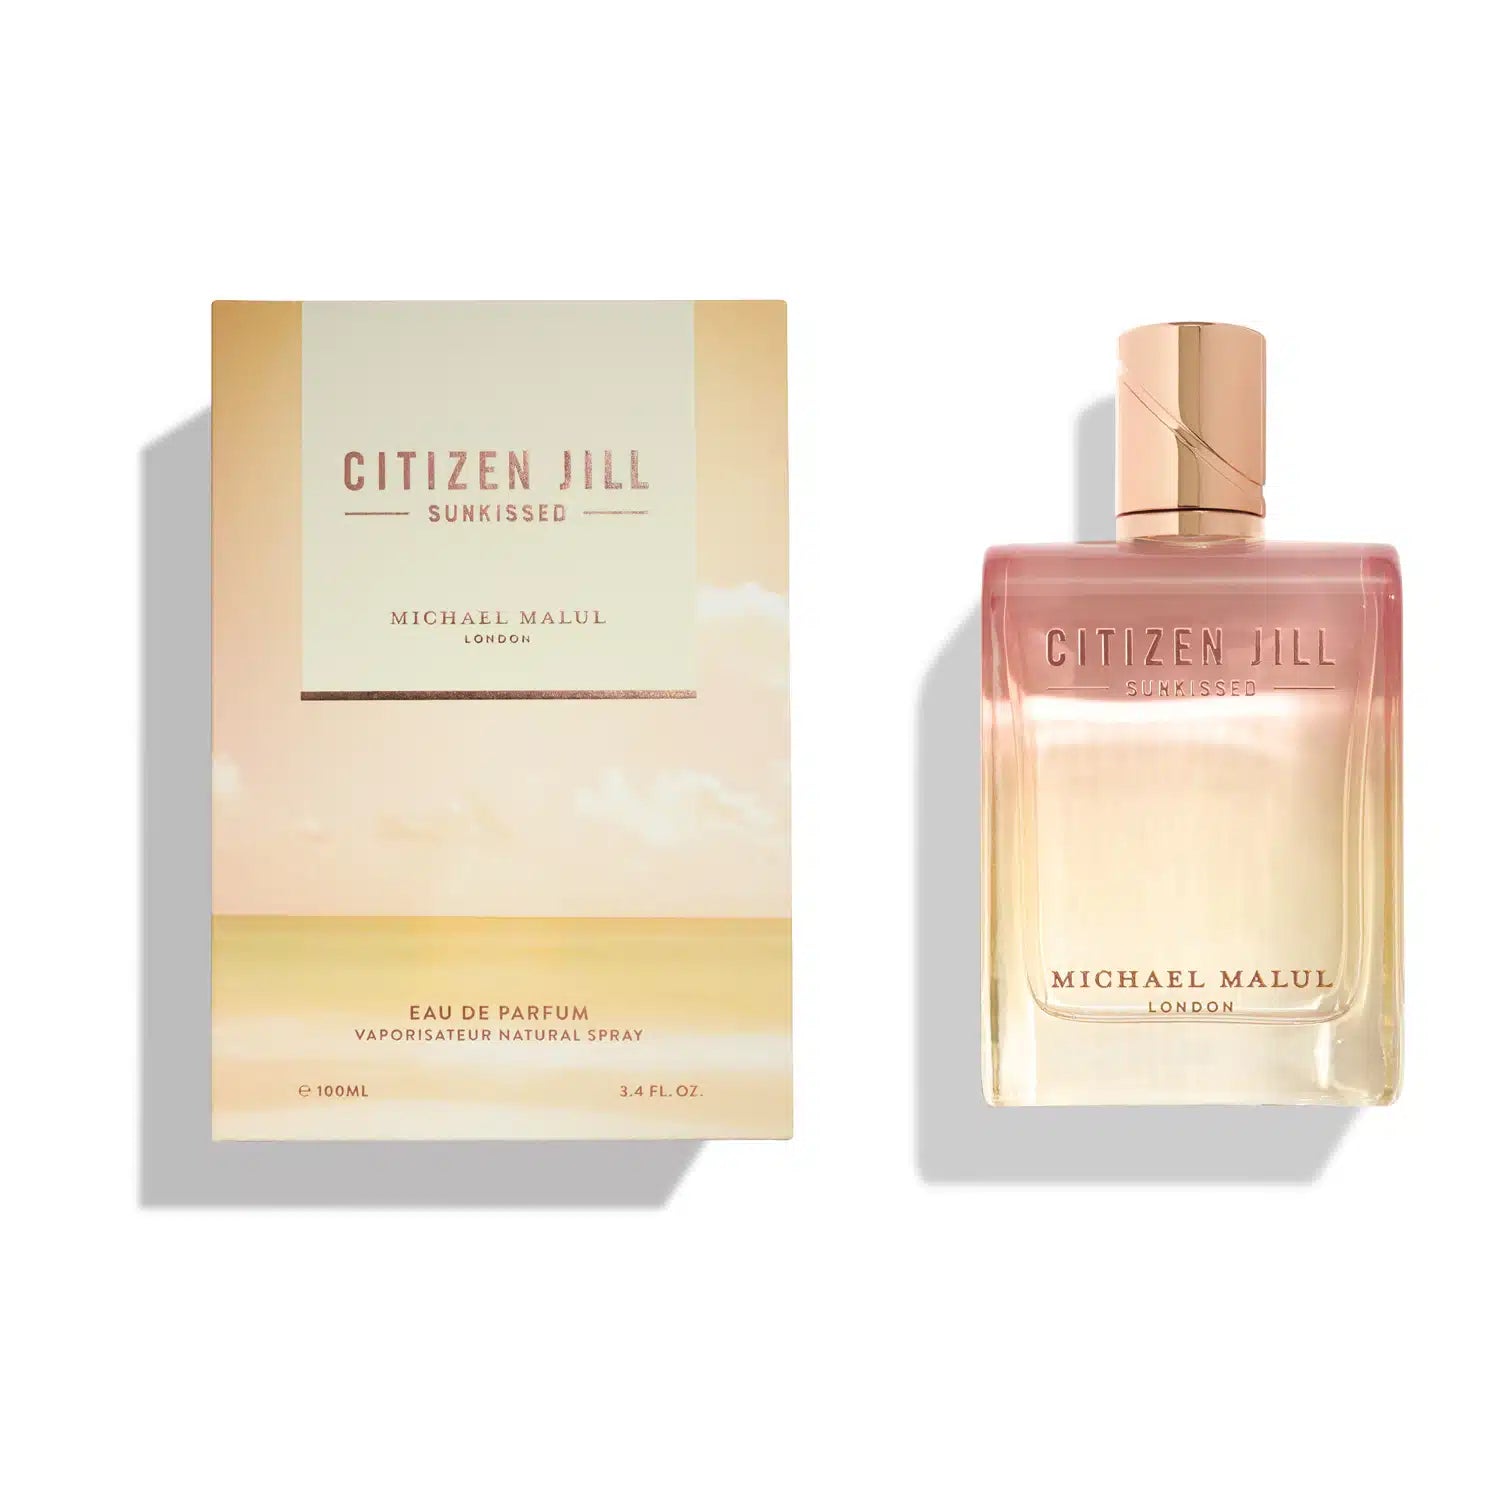 Citizen Jill Sunkissed edp by  Michael Malul London